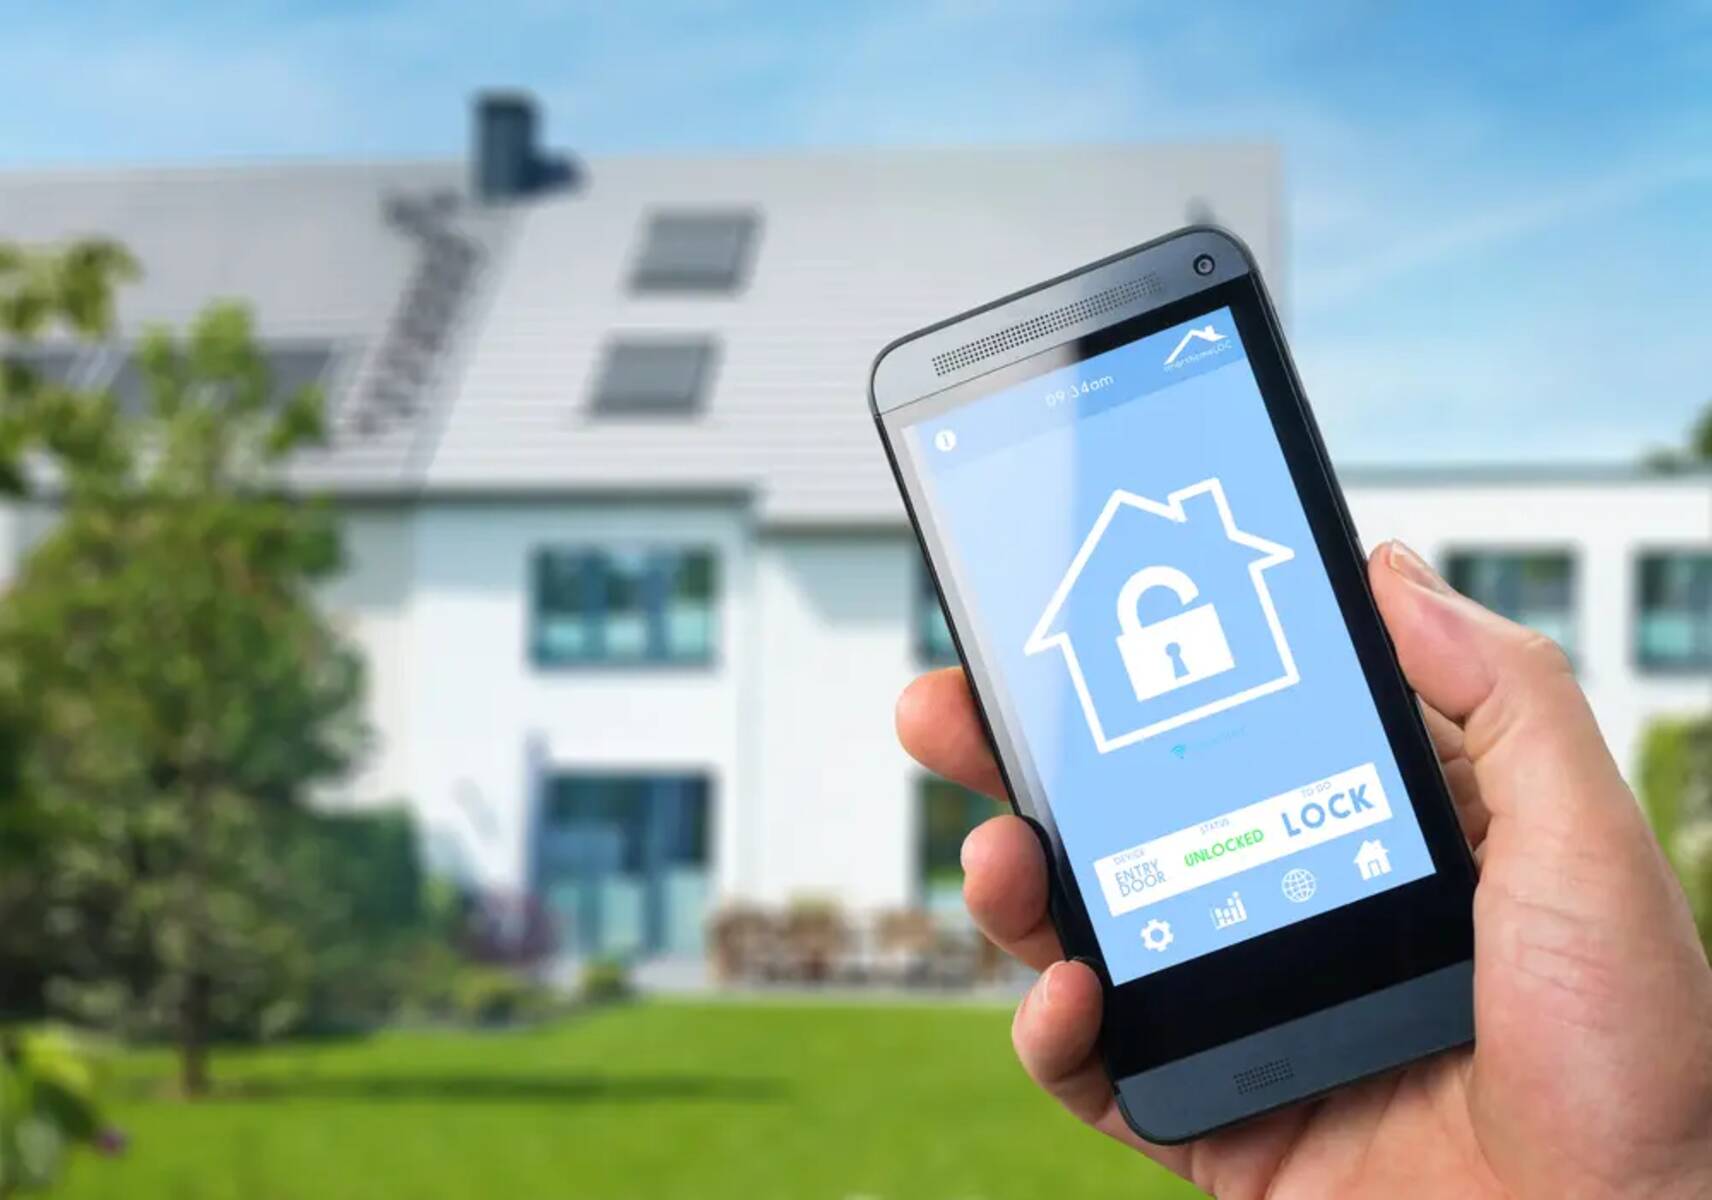 What Technology Allows You To Remotely Control Your Home Security